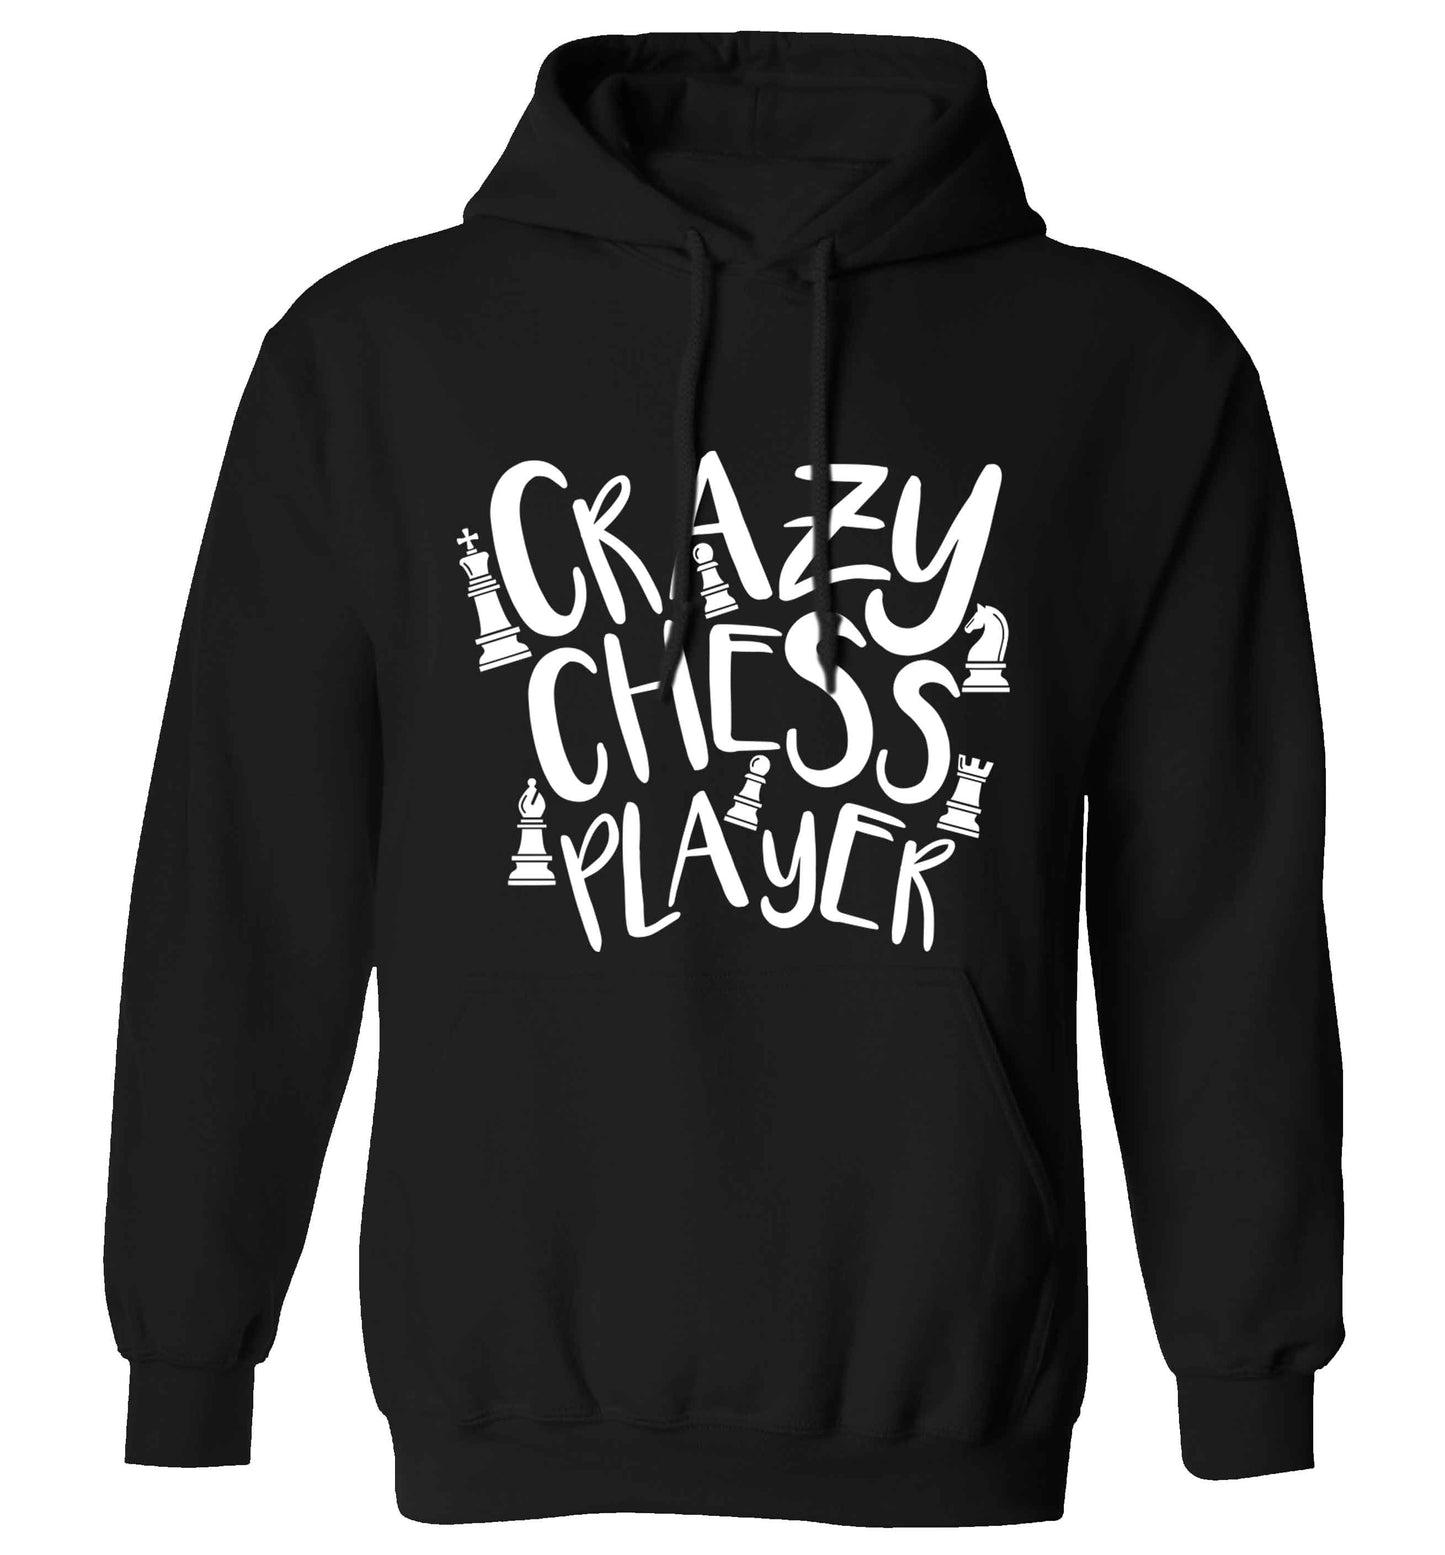 Crazy chess player adults unisex black hoodie 2XL